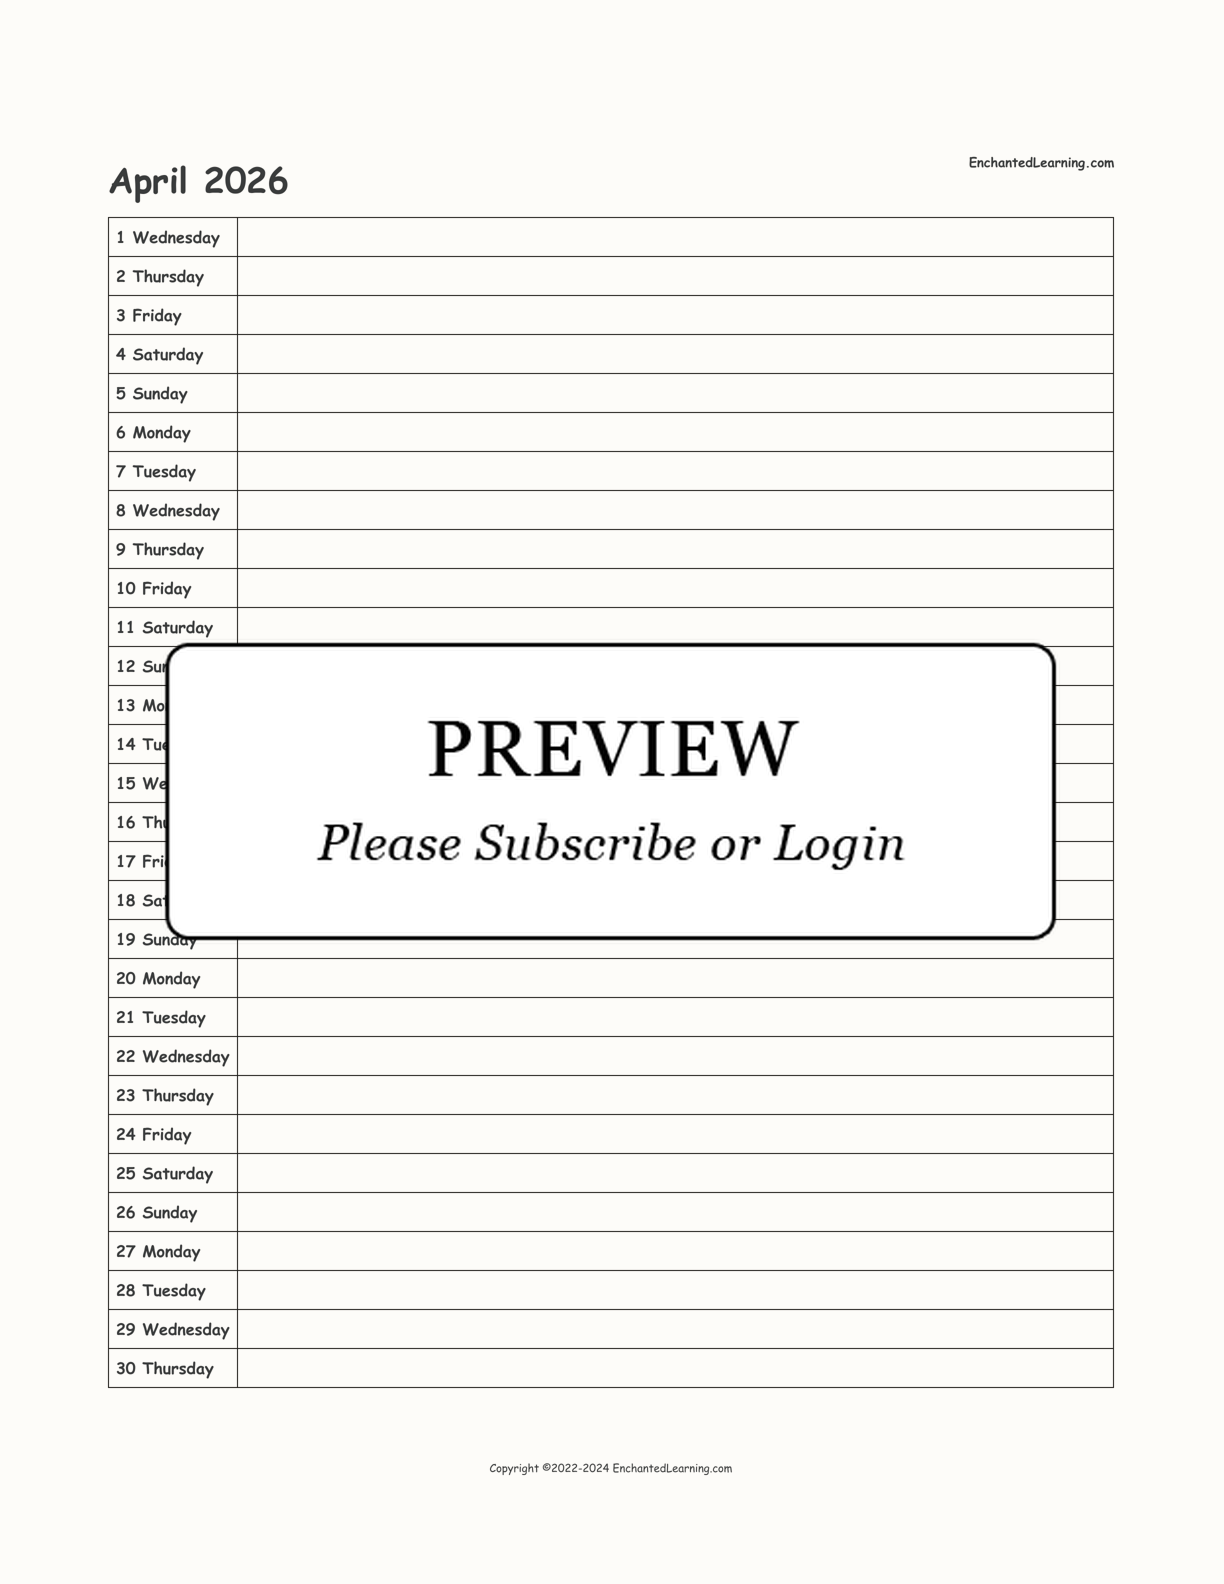 2026 Scheduling Calendar interactive printout page 4